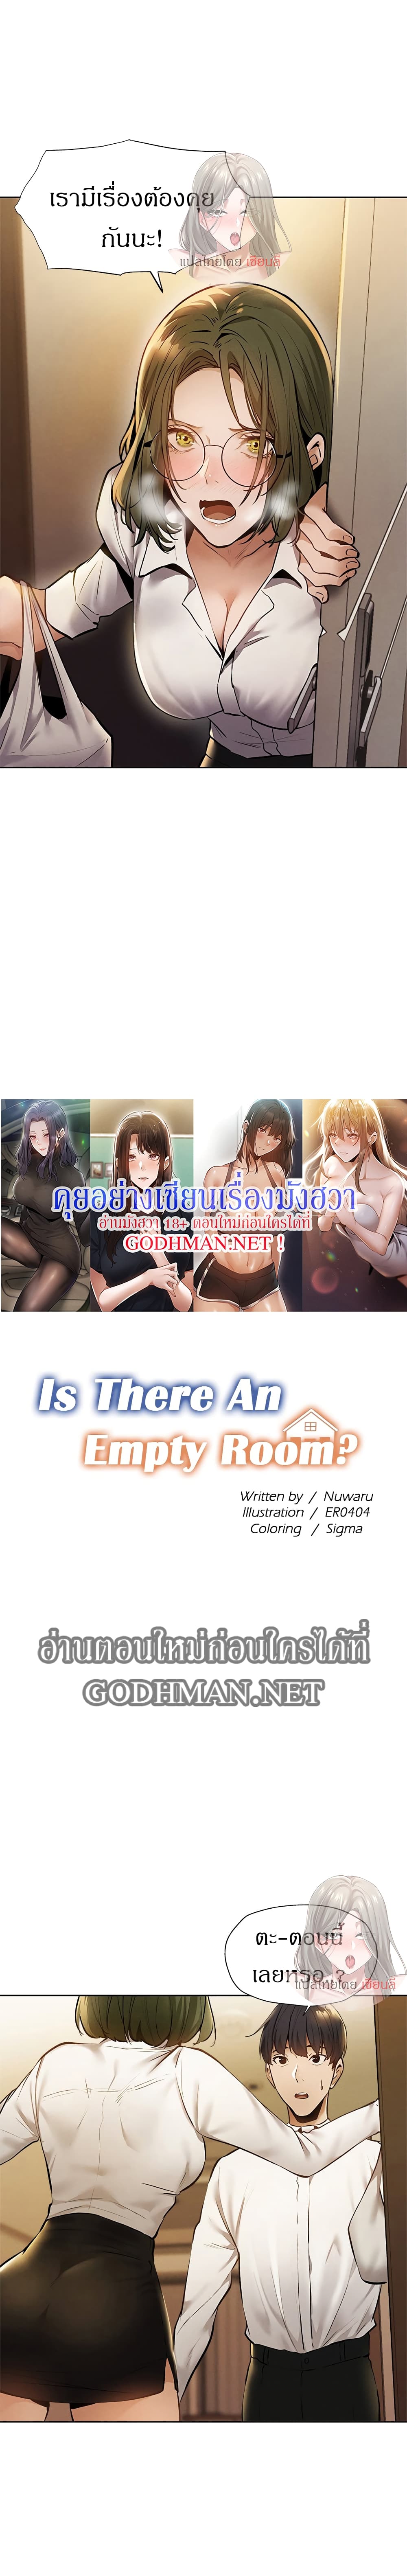 IS THERE AN EMPTY ROOM 58 04